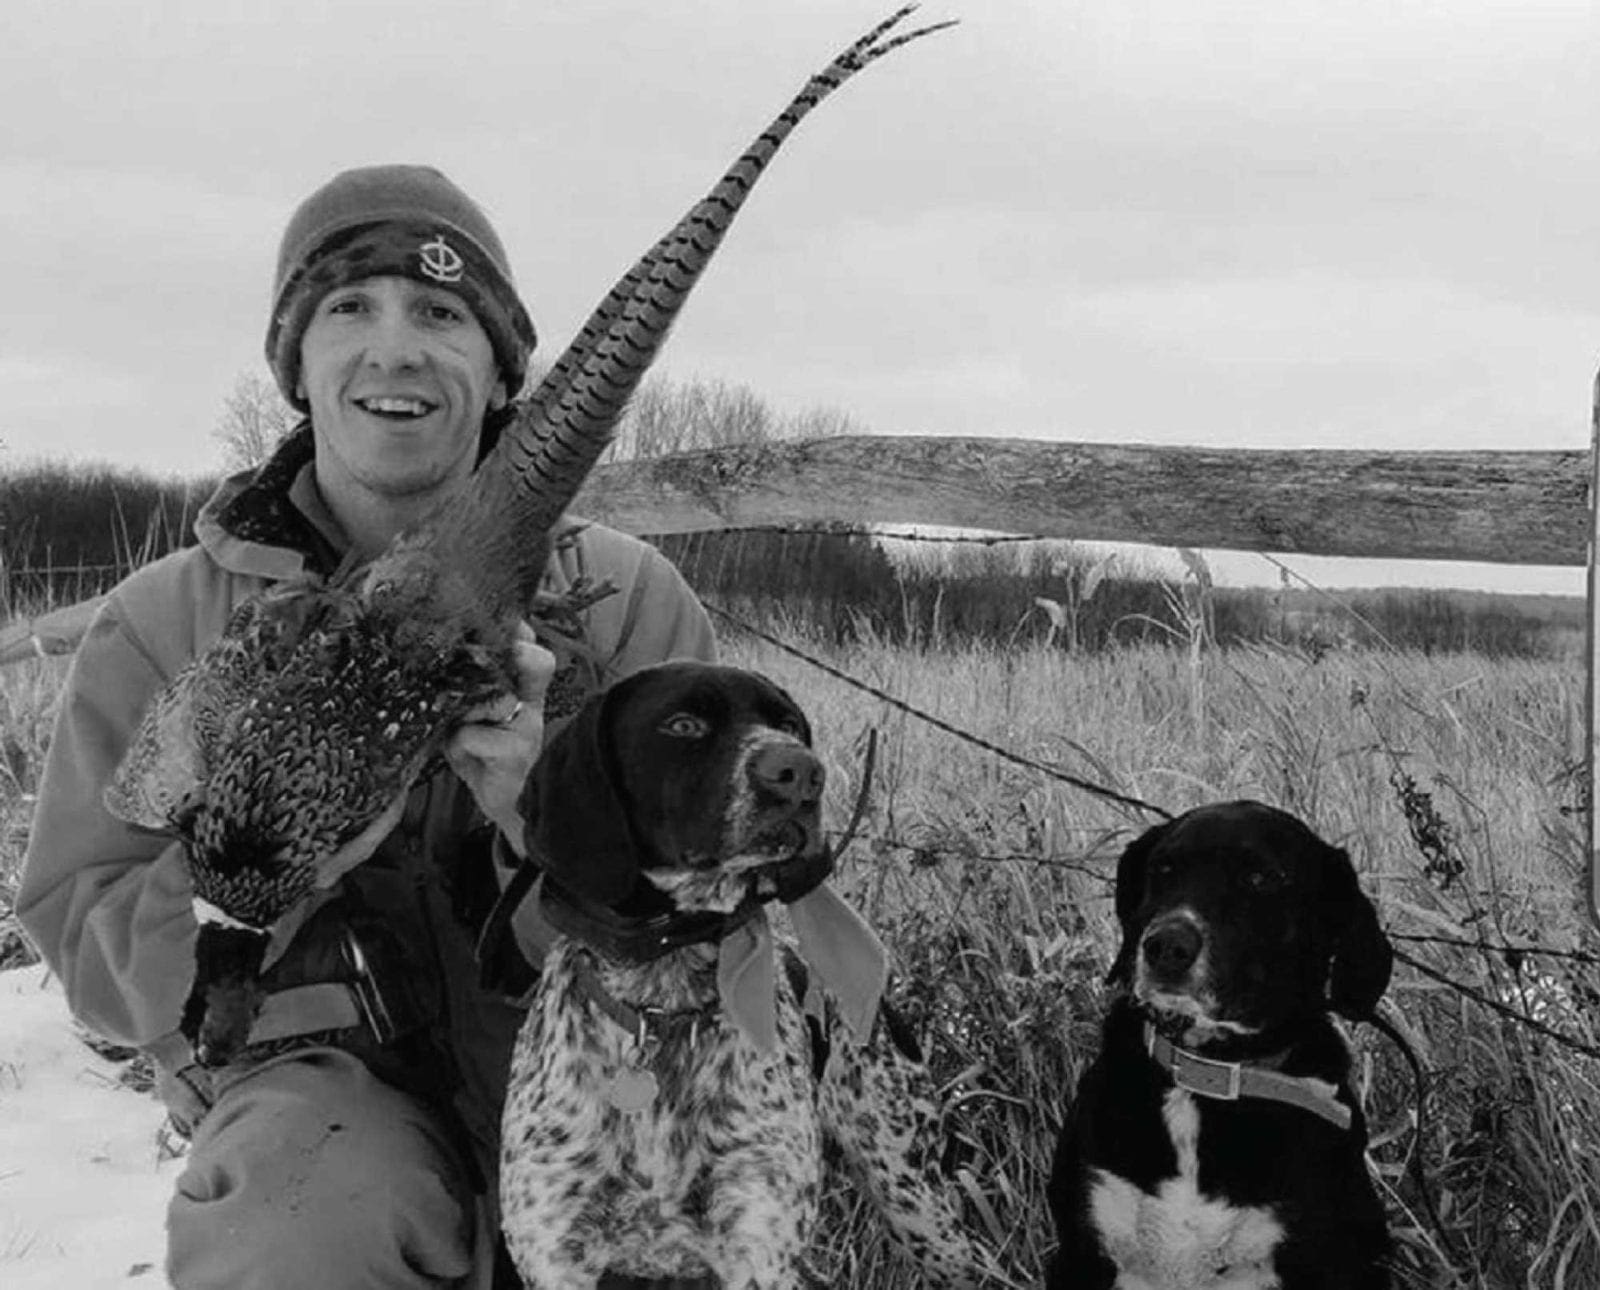 Sabin Adams on a pheasant hunt with his dogs Remnar and Daisy